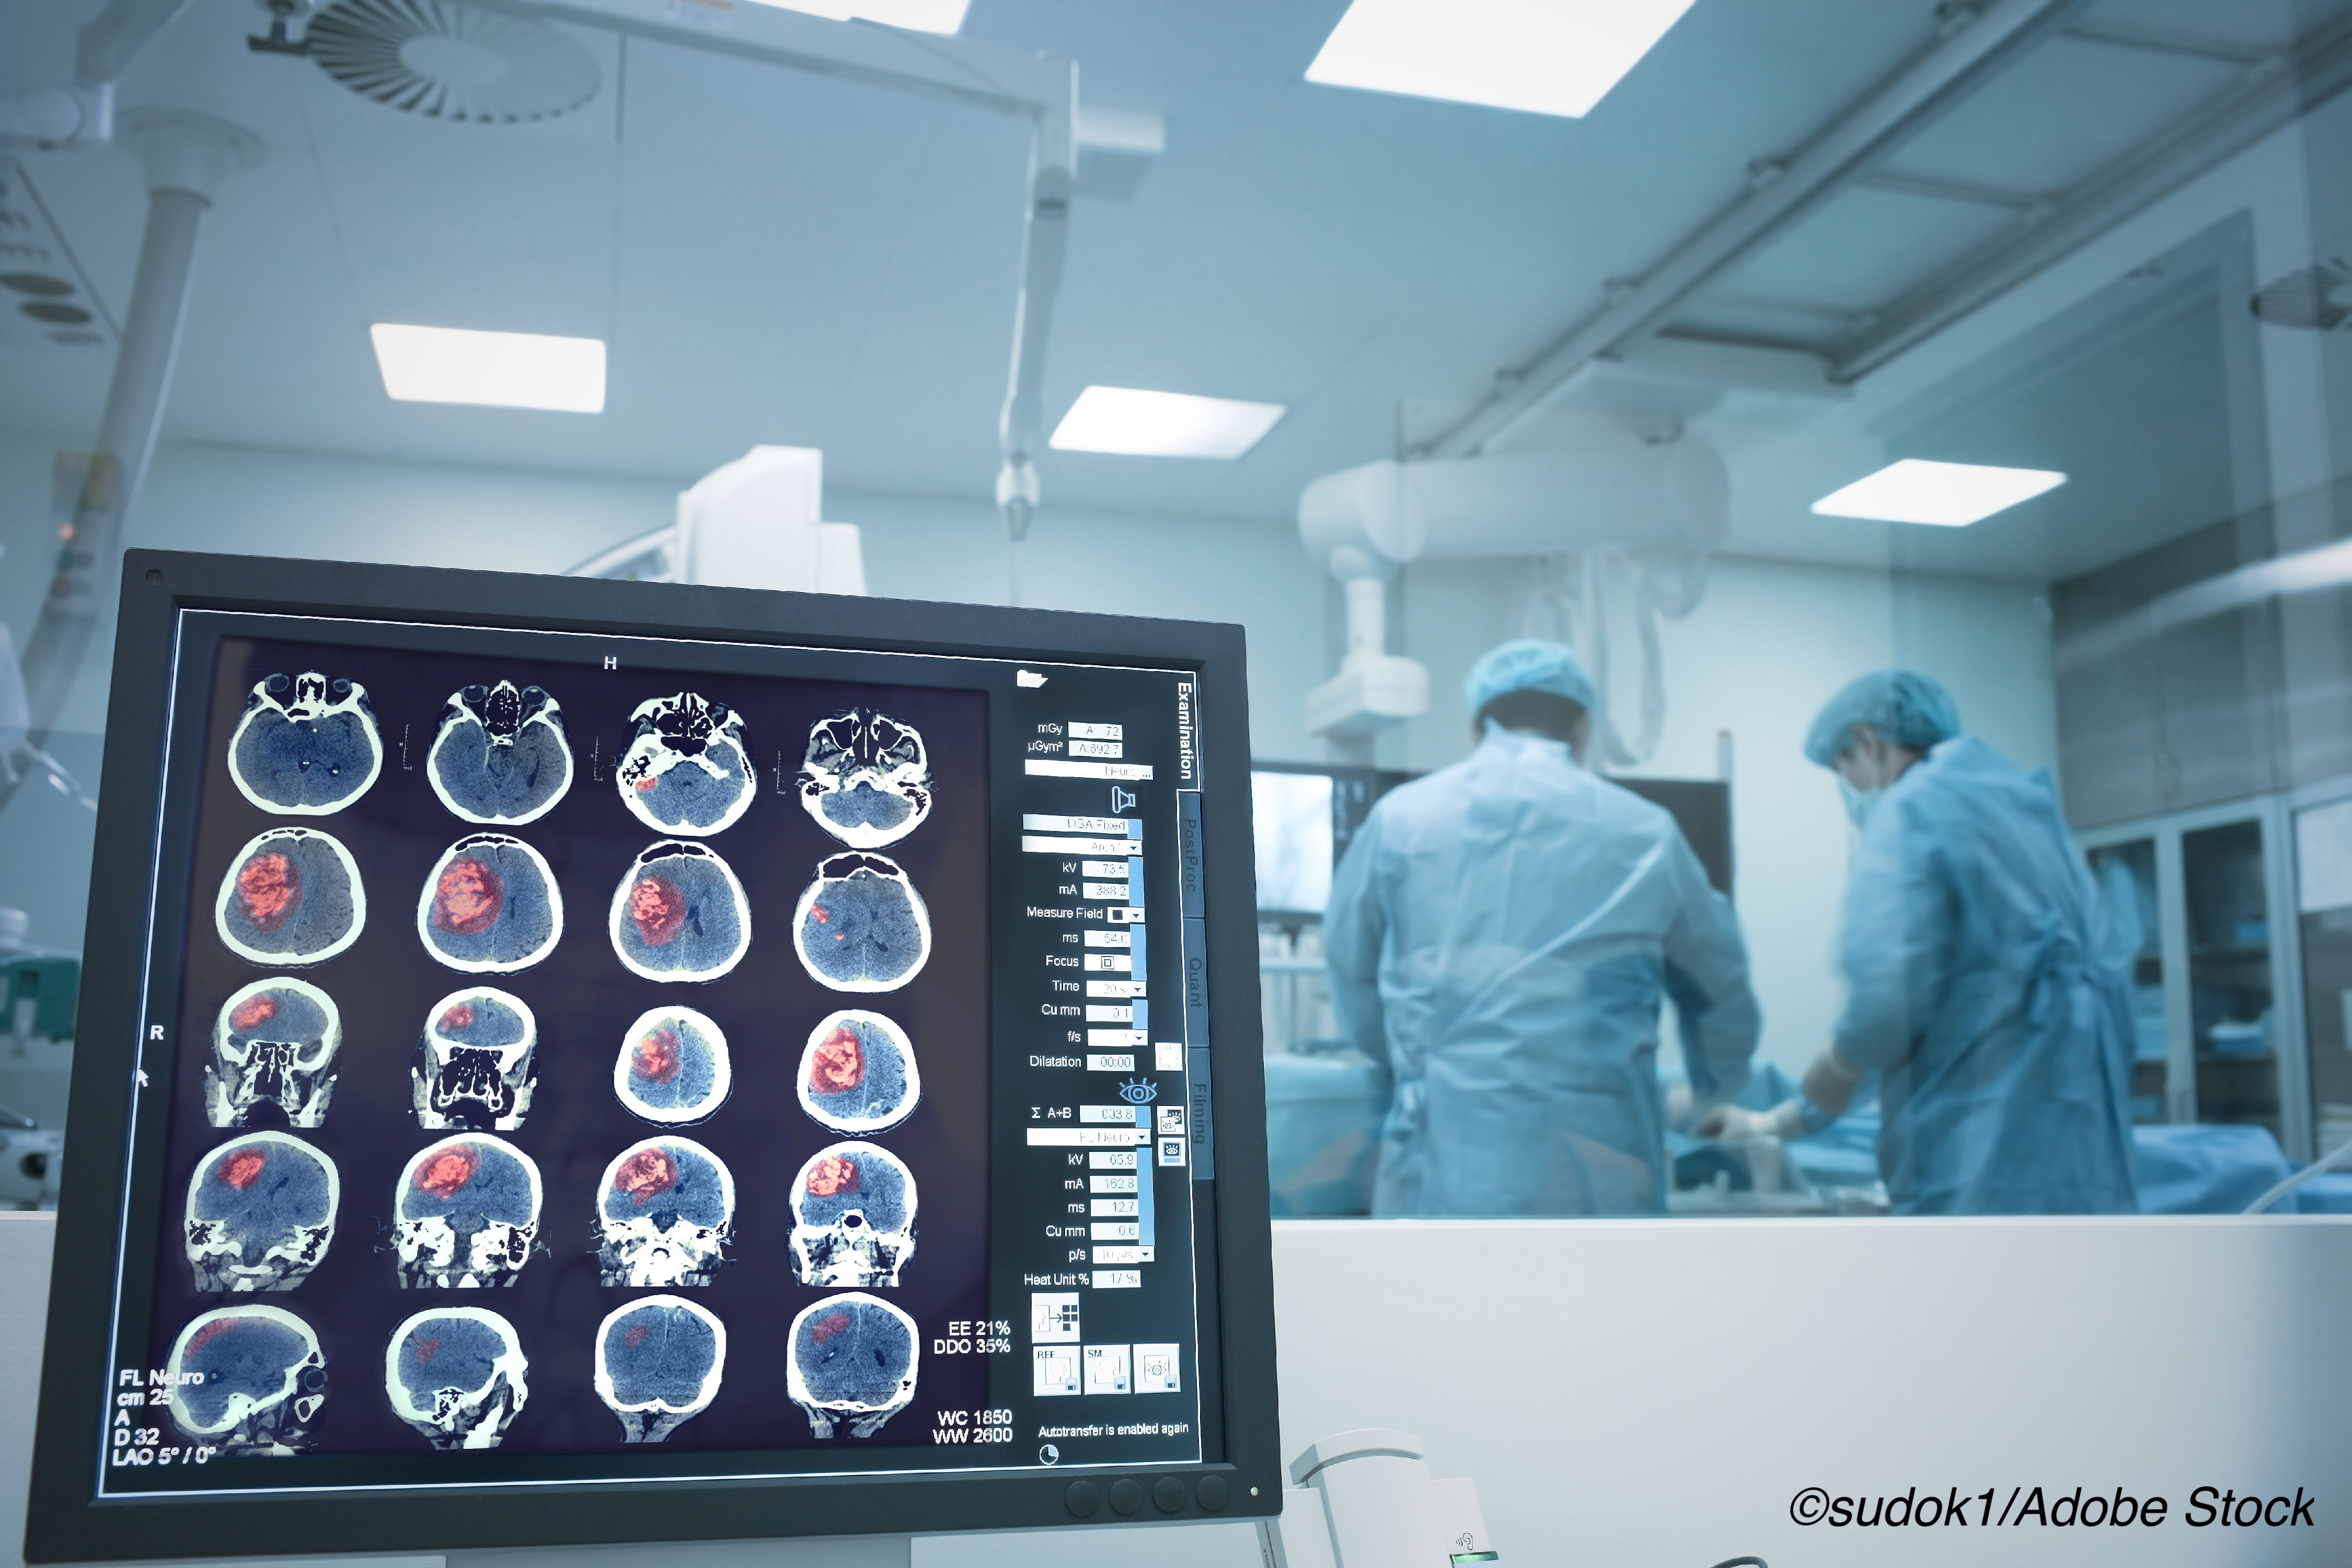 In-Hospital Stroke Associated with Worse Outcomes